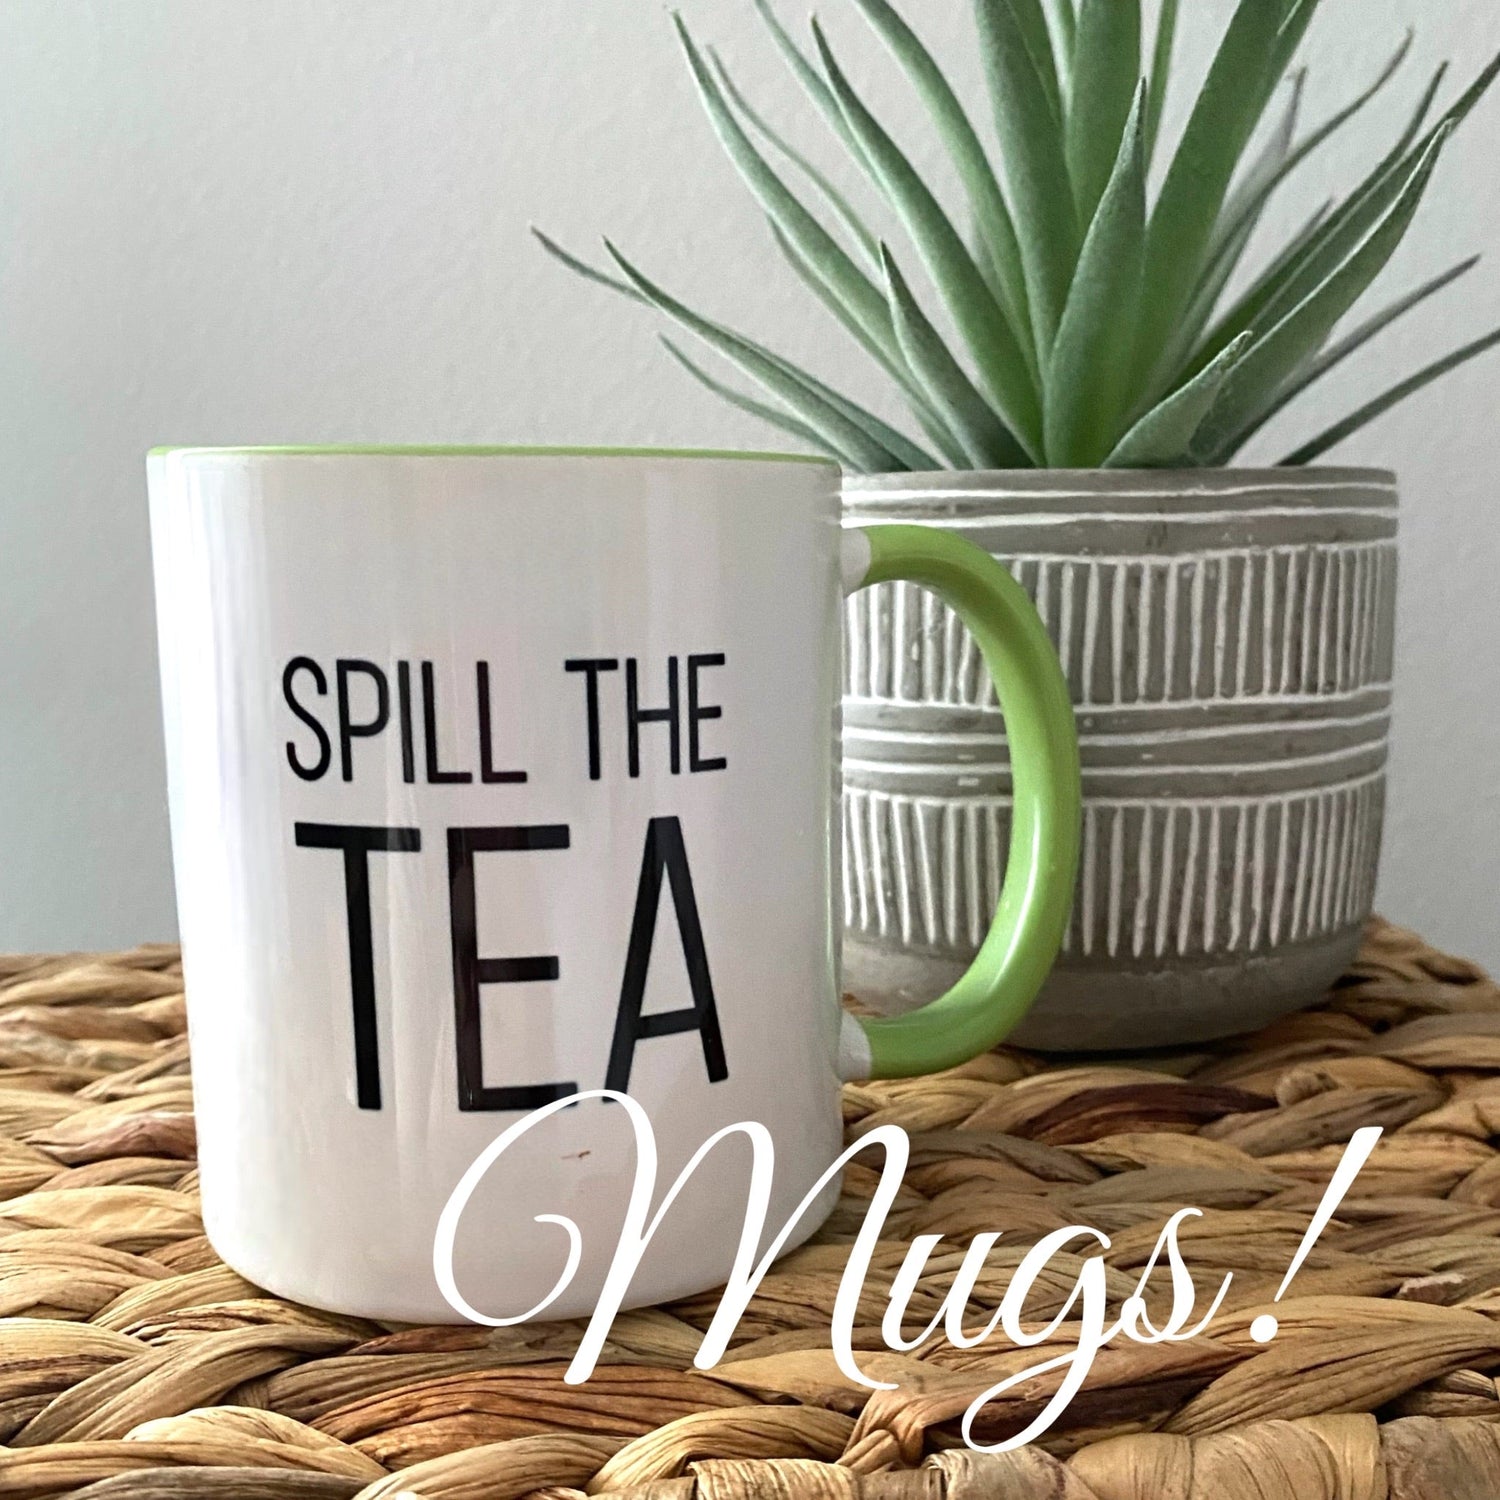 Mugs for every occasion!